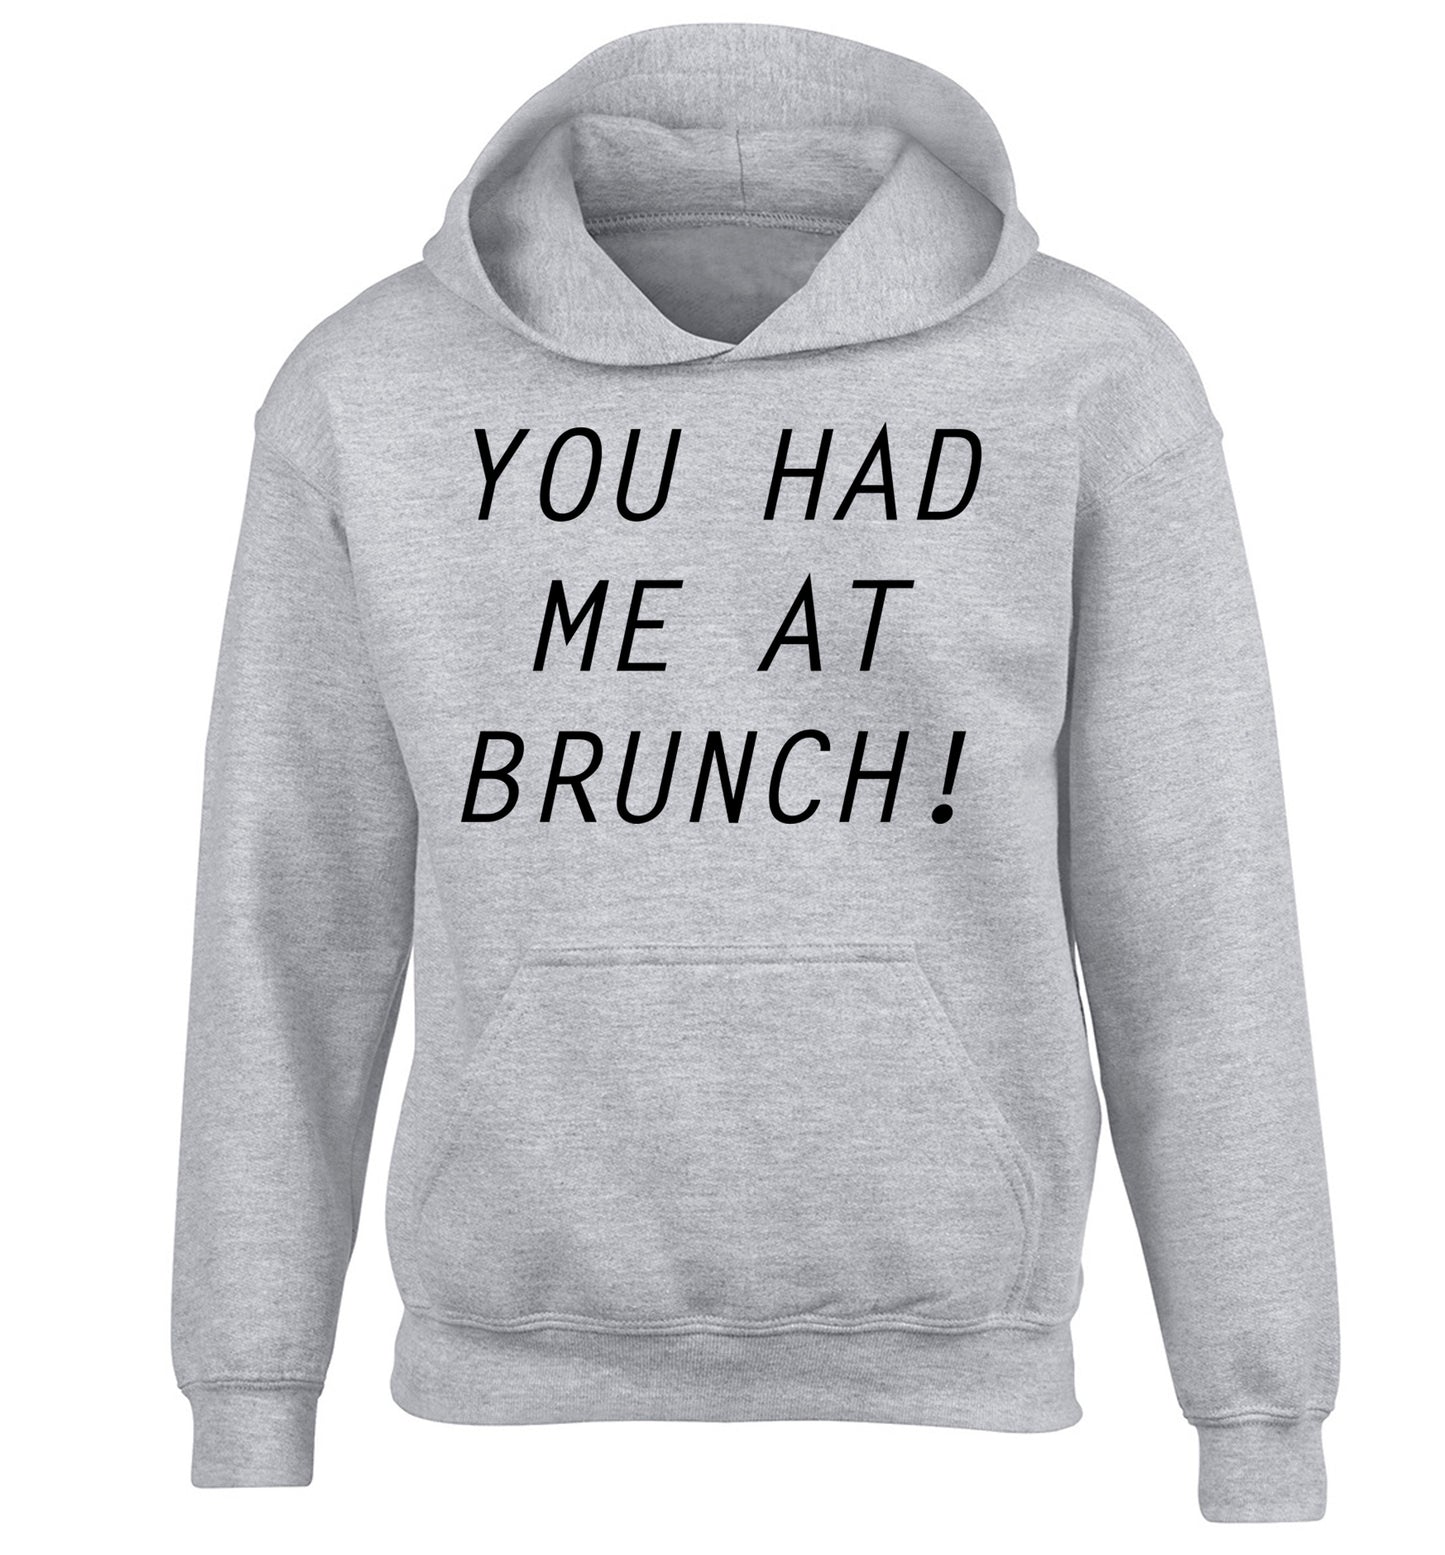 You had me at brunch children's grey hoodie 12-14 Years